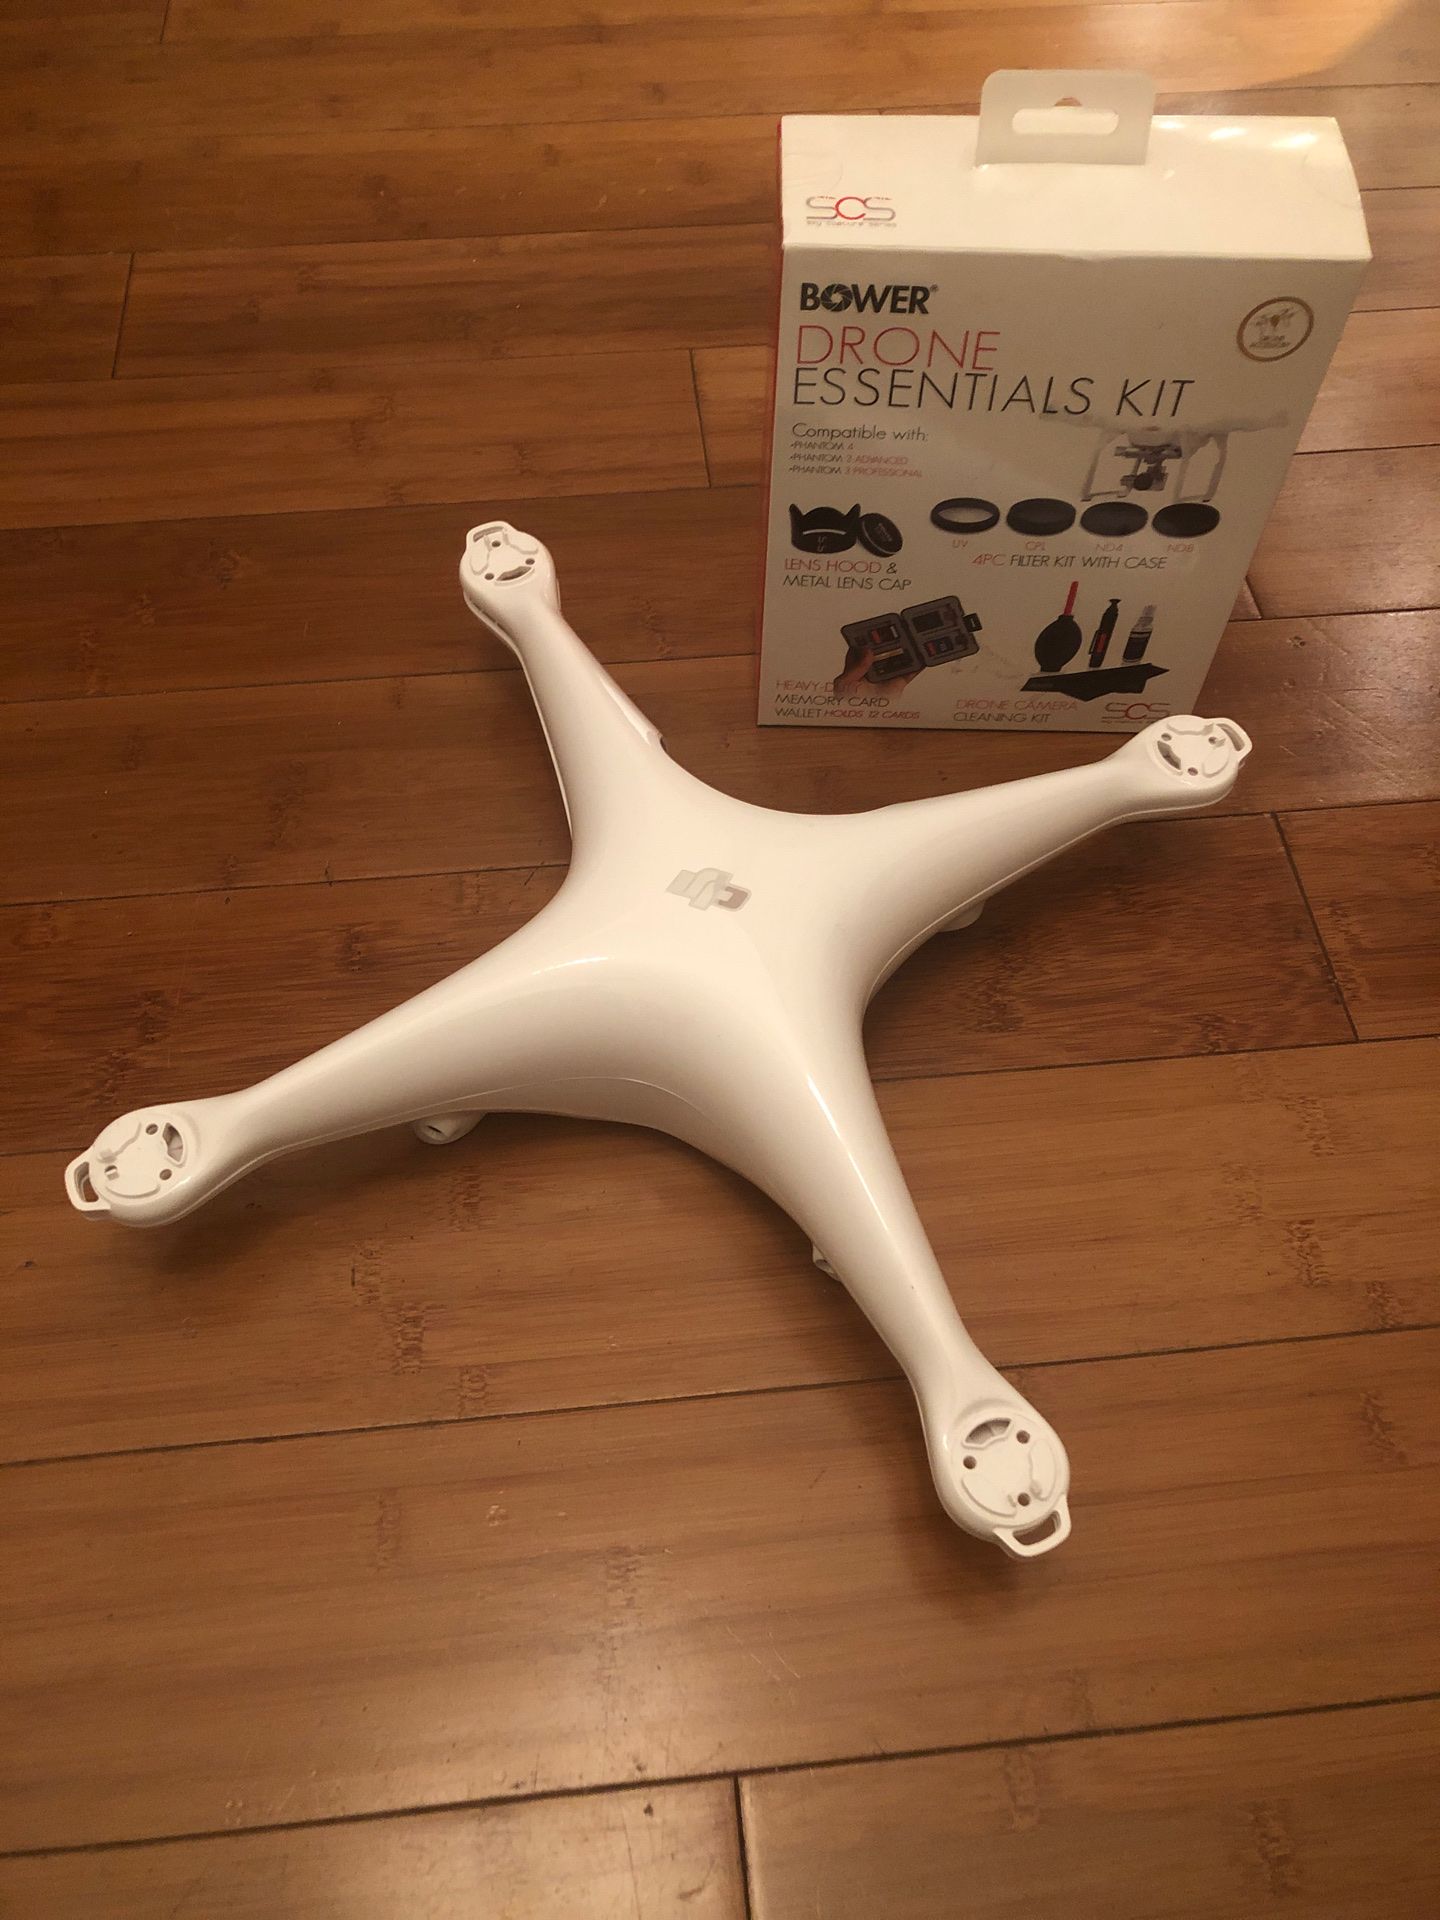 Phantom 4 drone shell and accessories